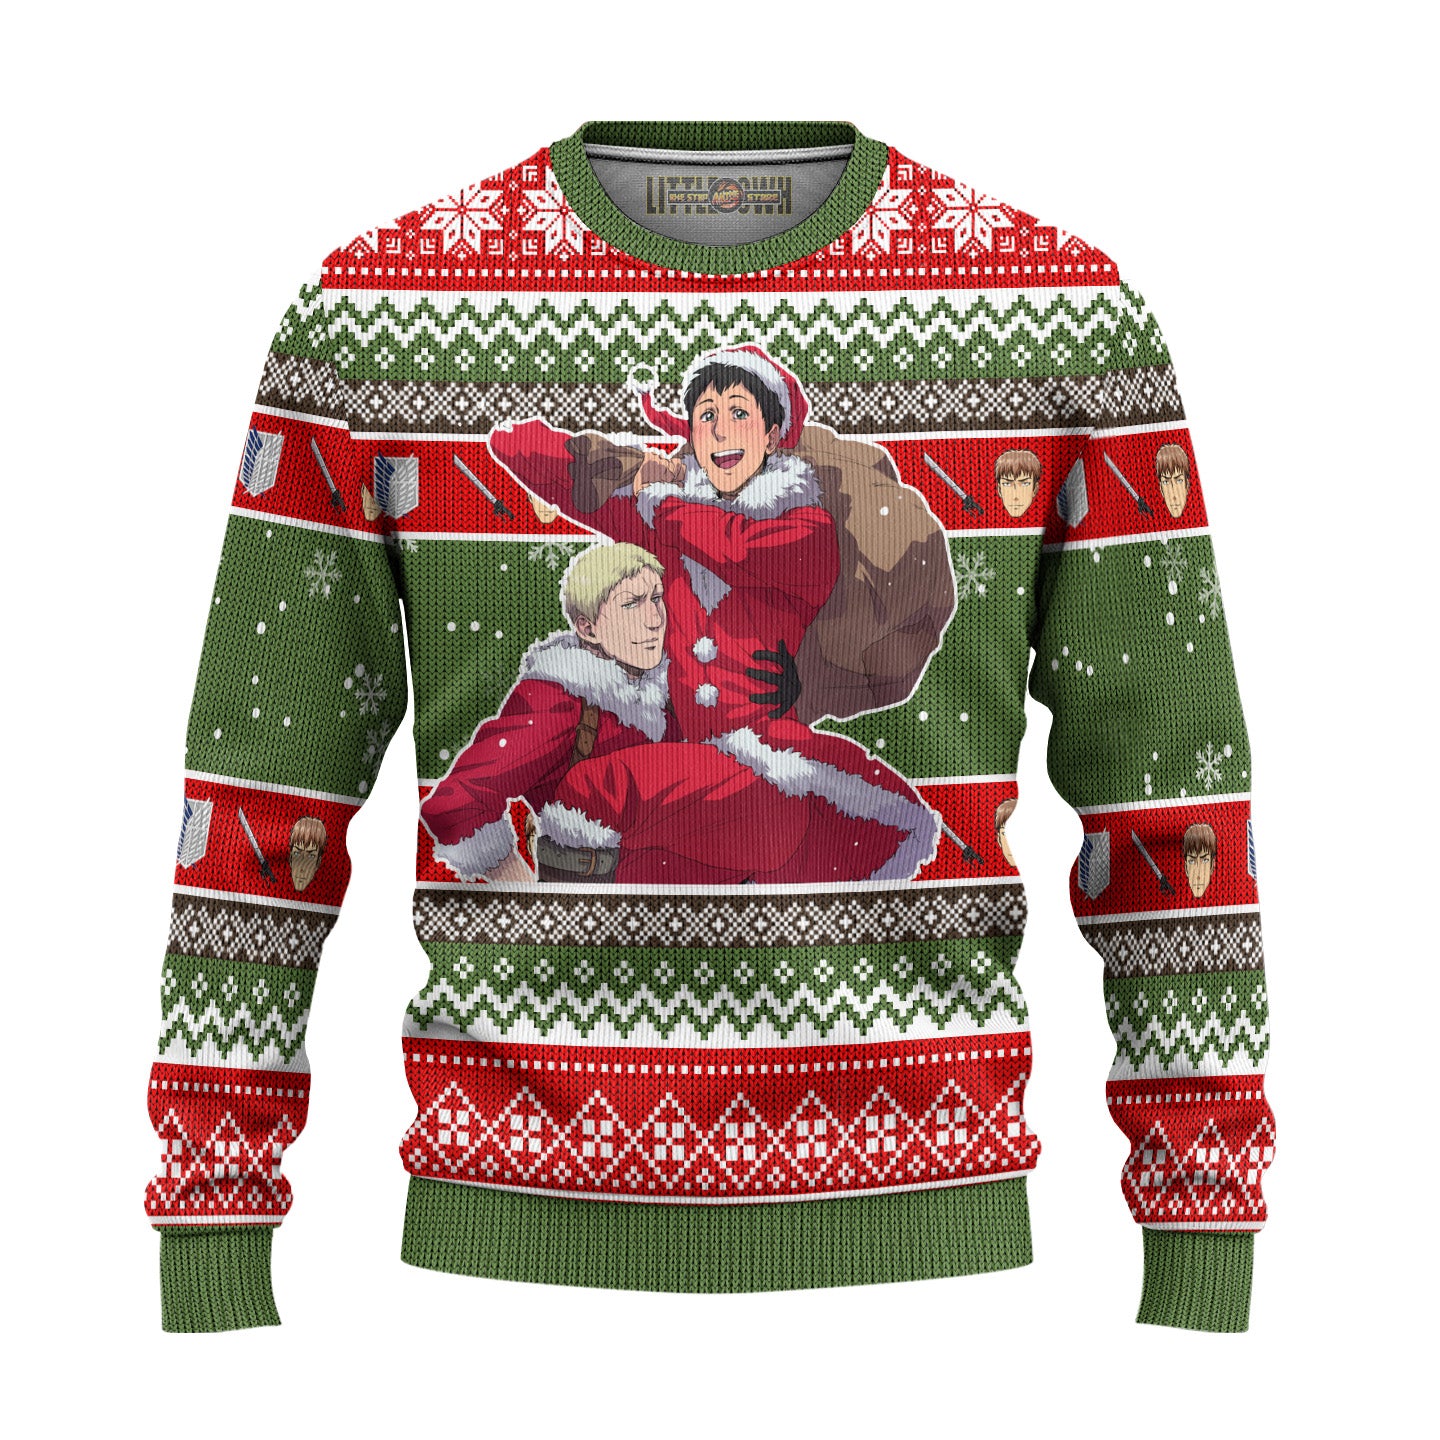 Jean Kirstein Attack on Titan Anime Ugly Christmas Sweater Gift For Fans